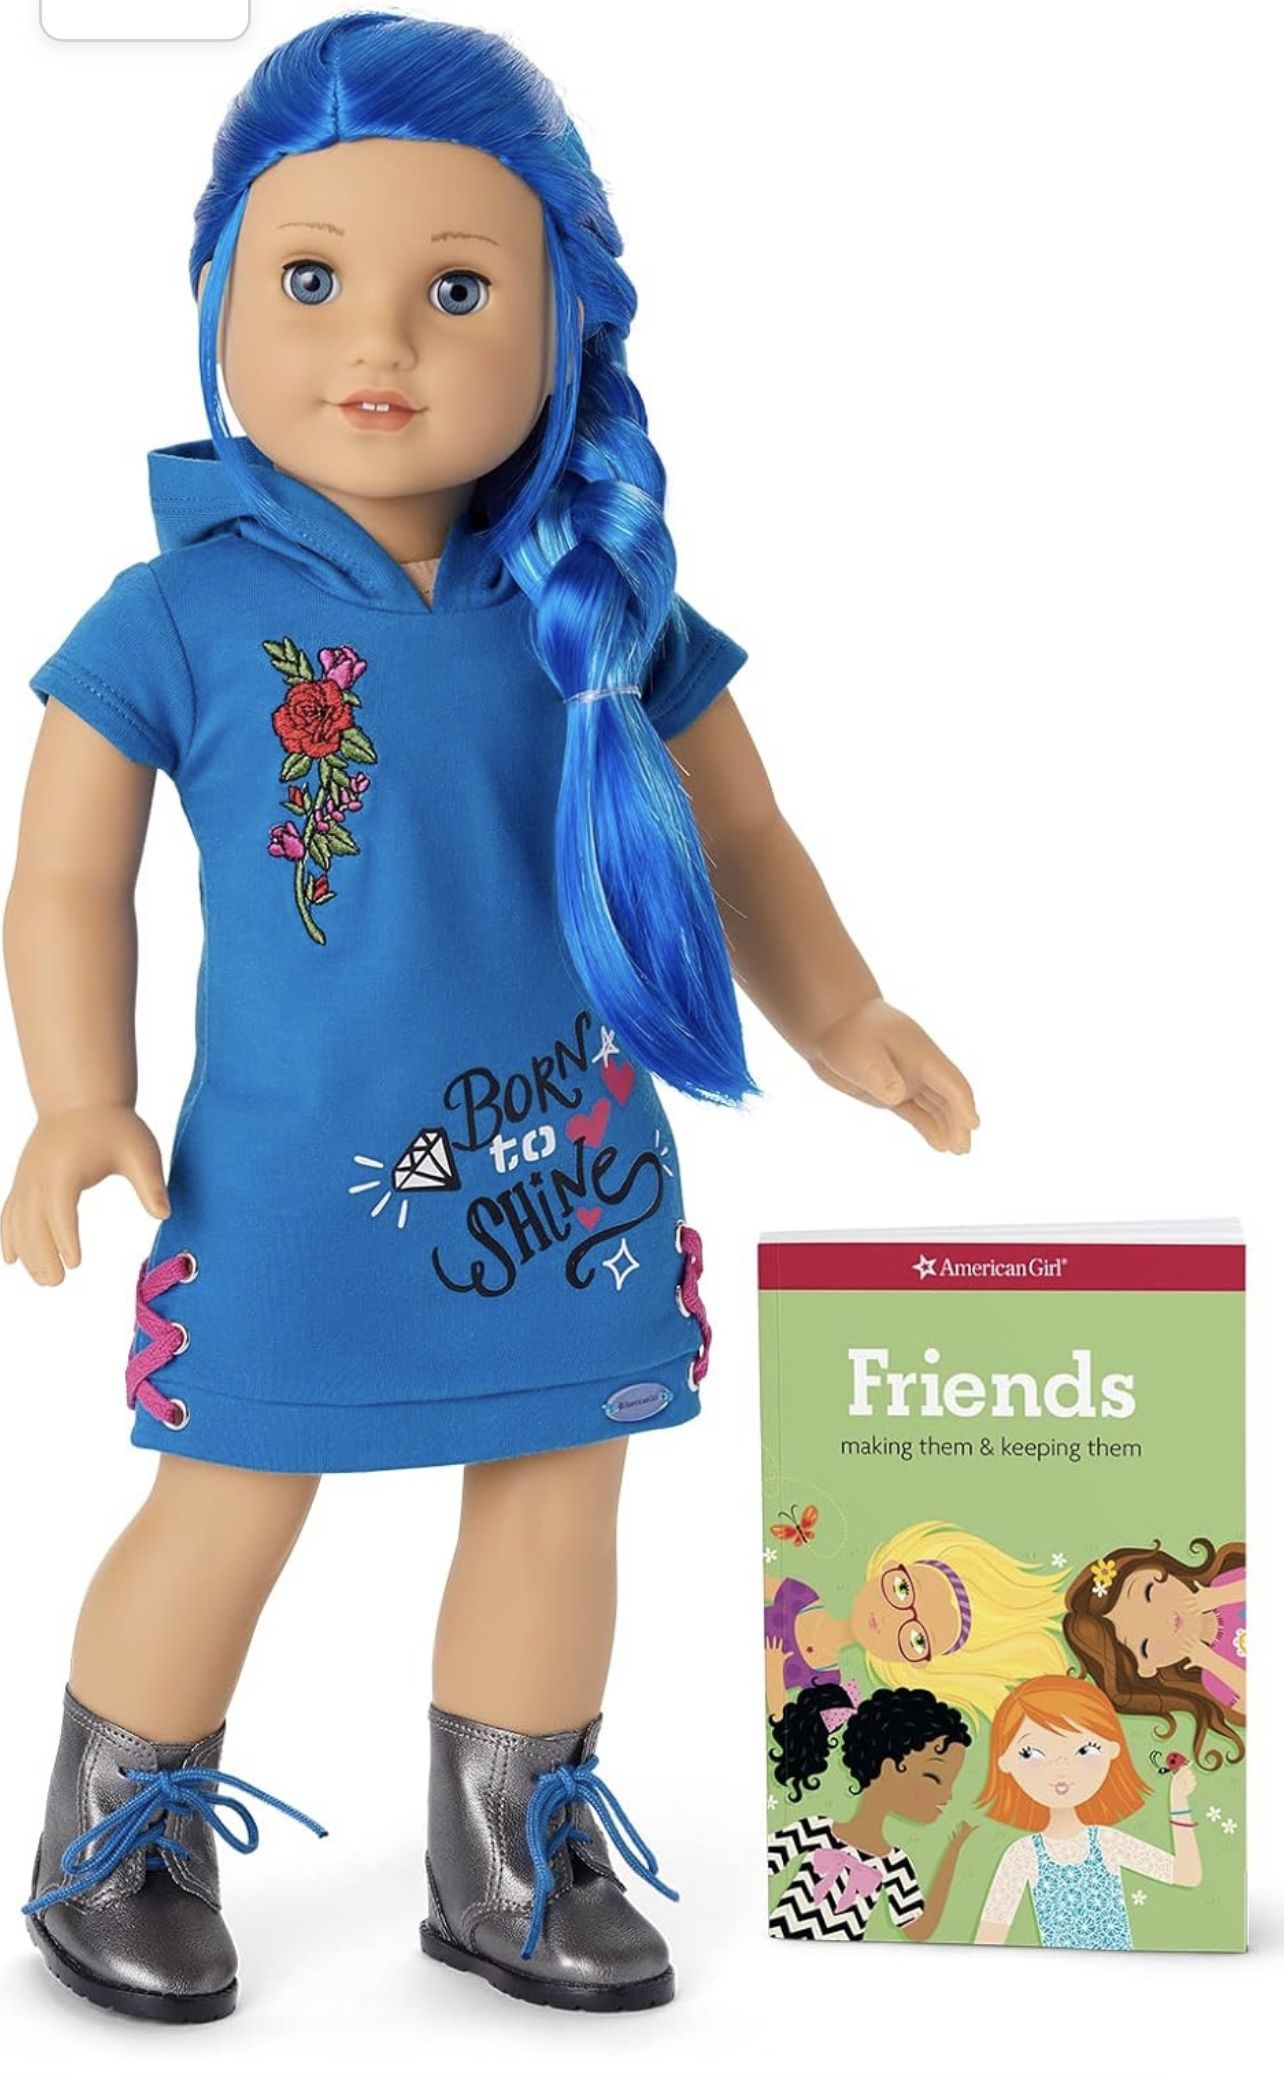 American Girl Truly Me 18-inch Doll #90 with Blue Eyes, Long Blue Hair, and Light-to-Medium Skin